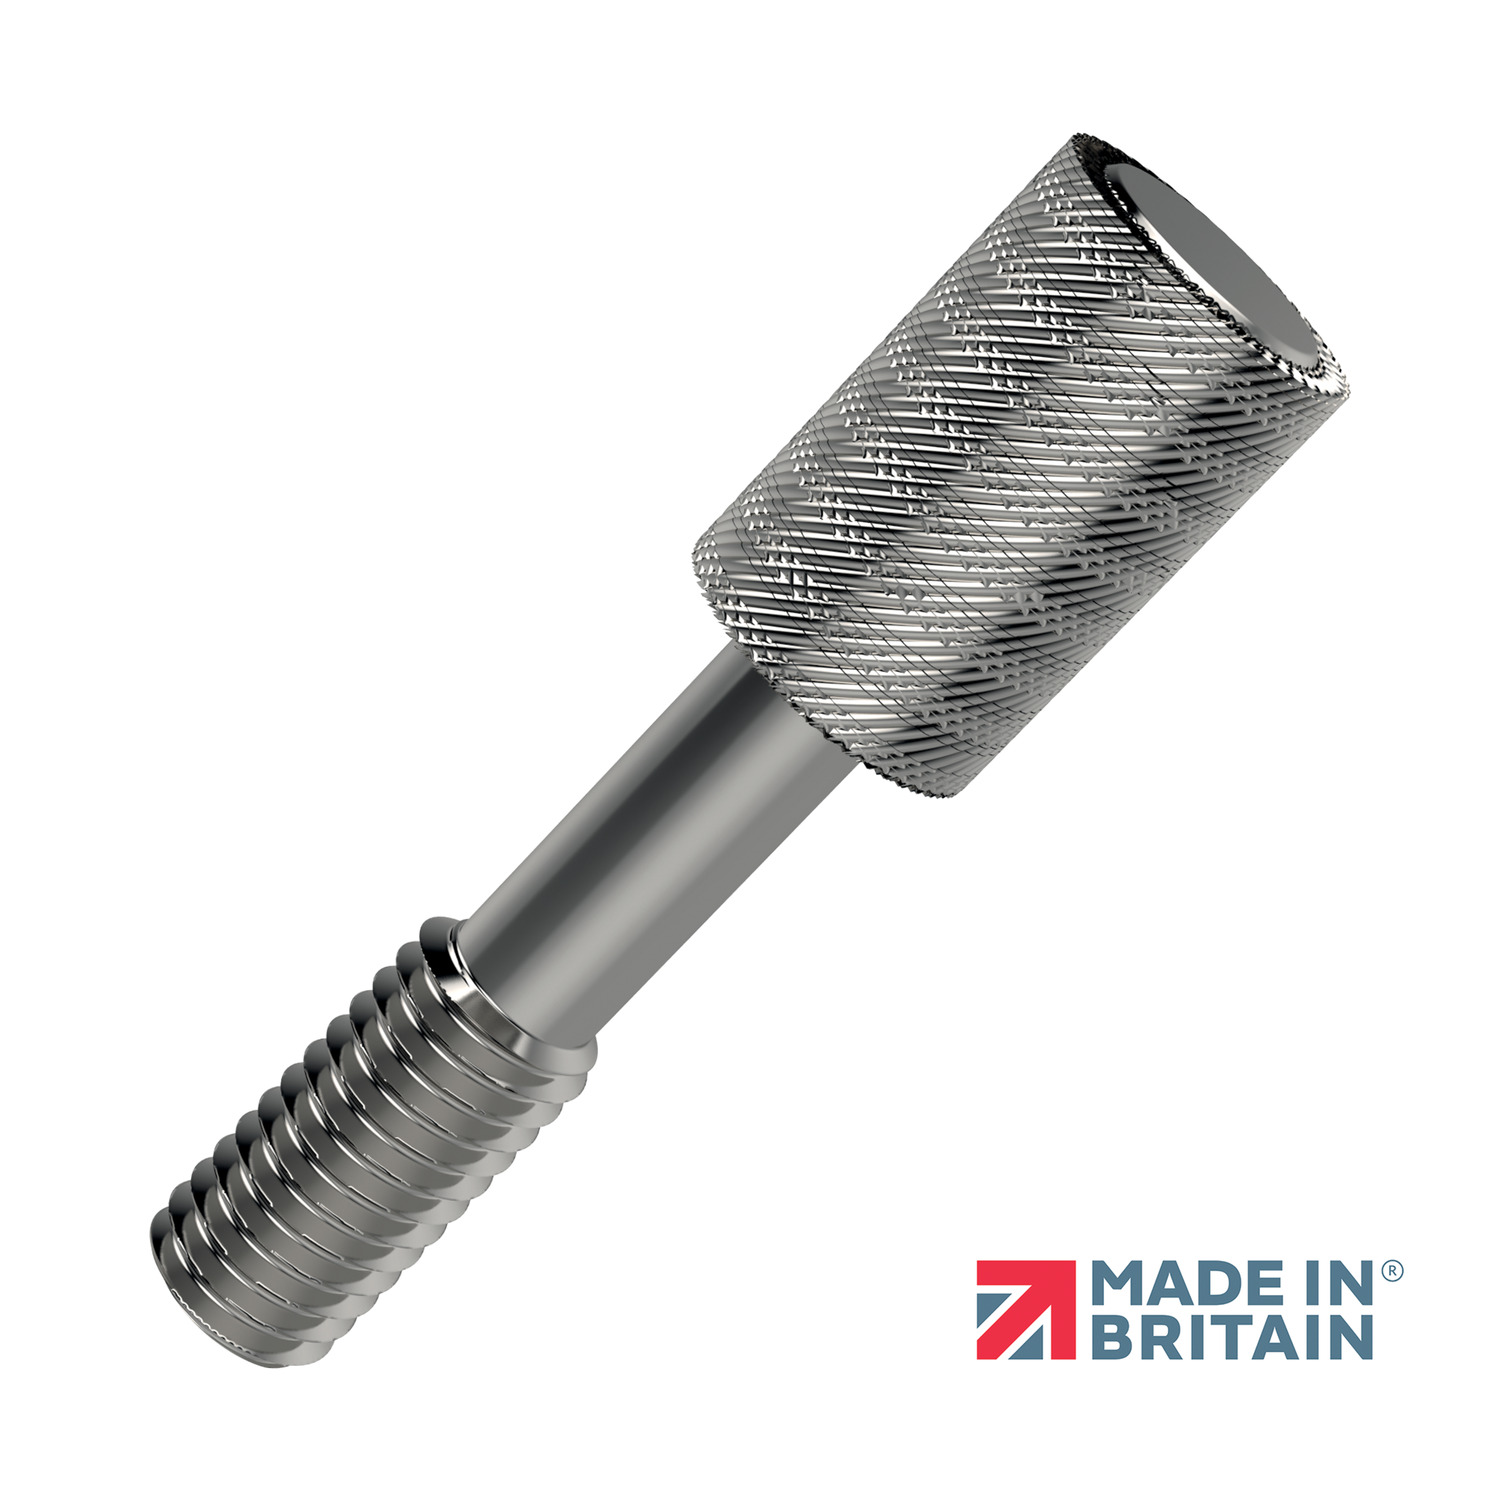 Captive Thumb Screws A thin head captive thumb screw coming in stainless steel which is suited to tighter spaces.